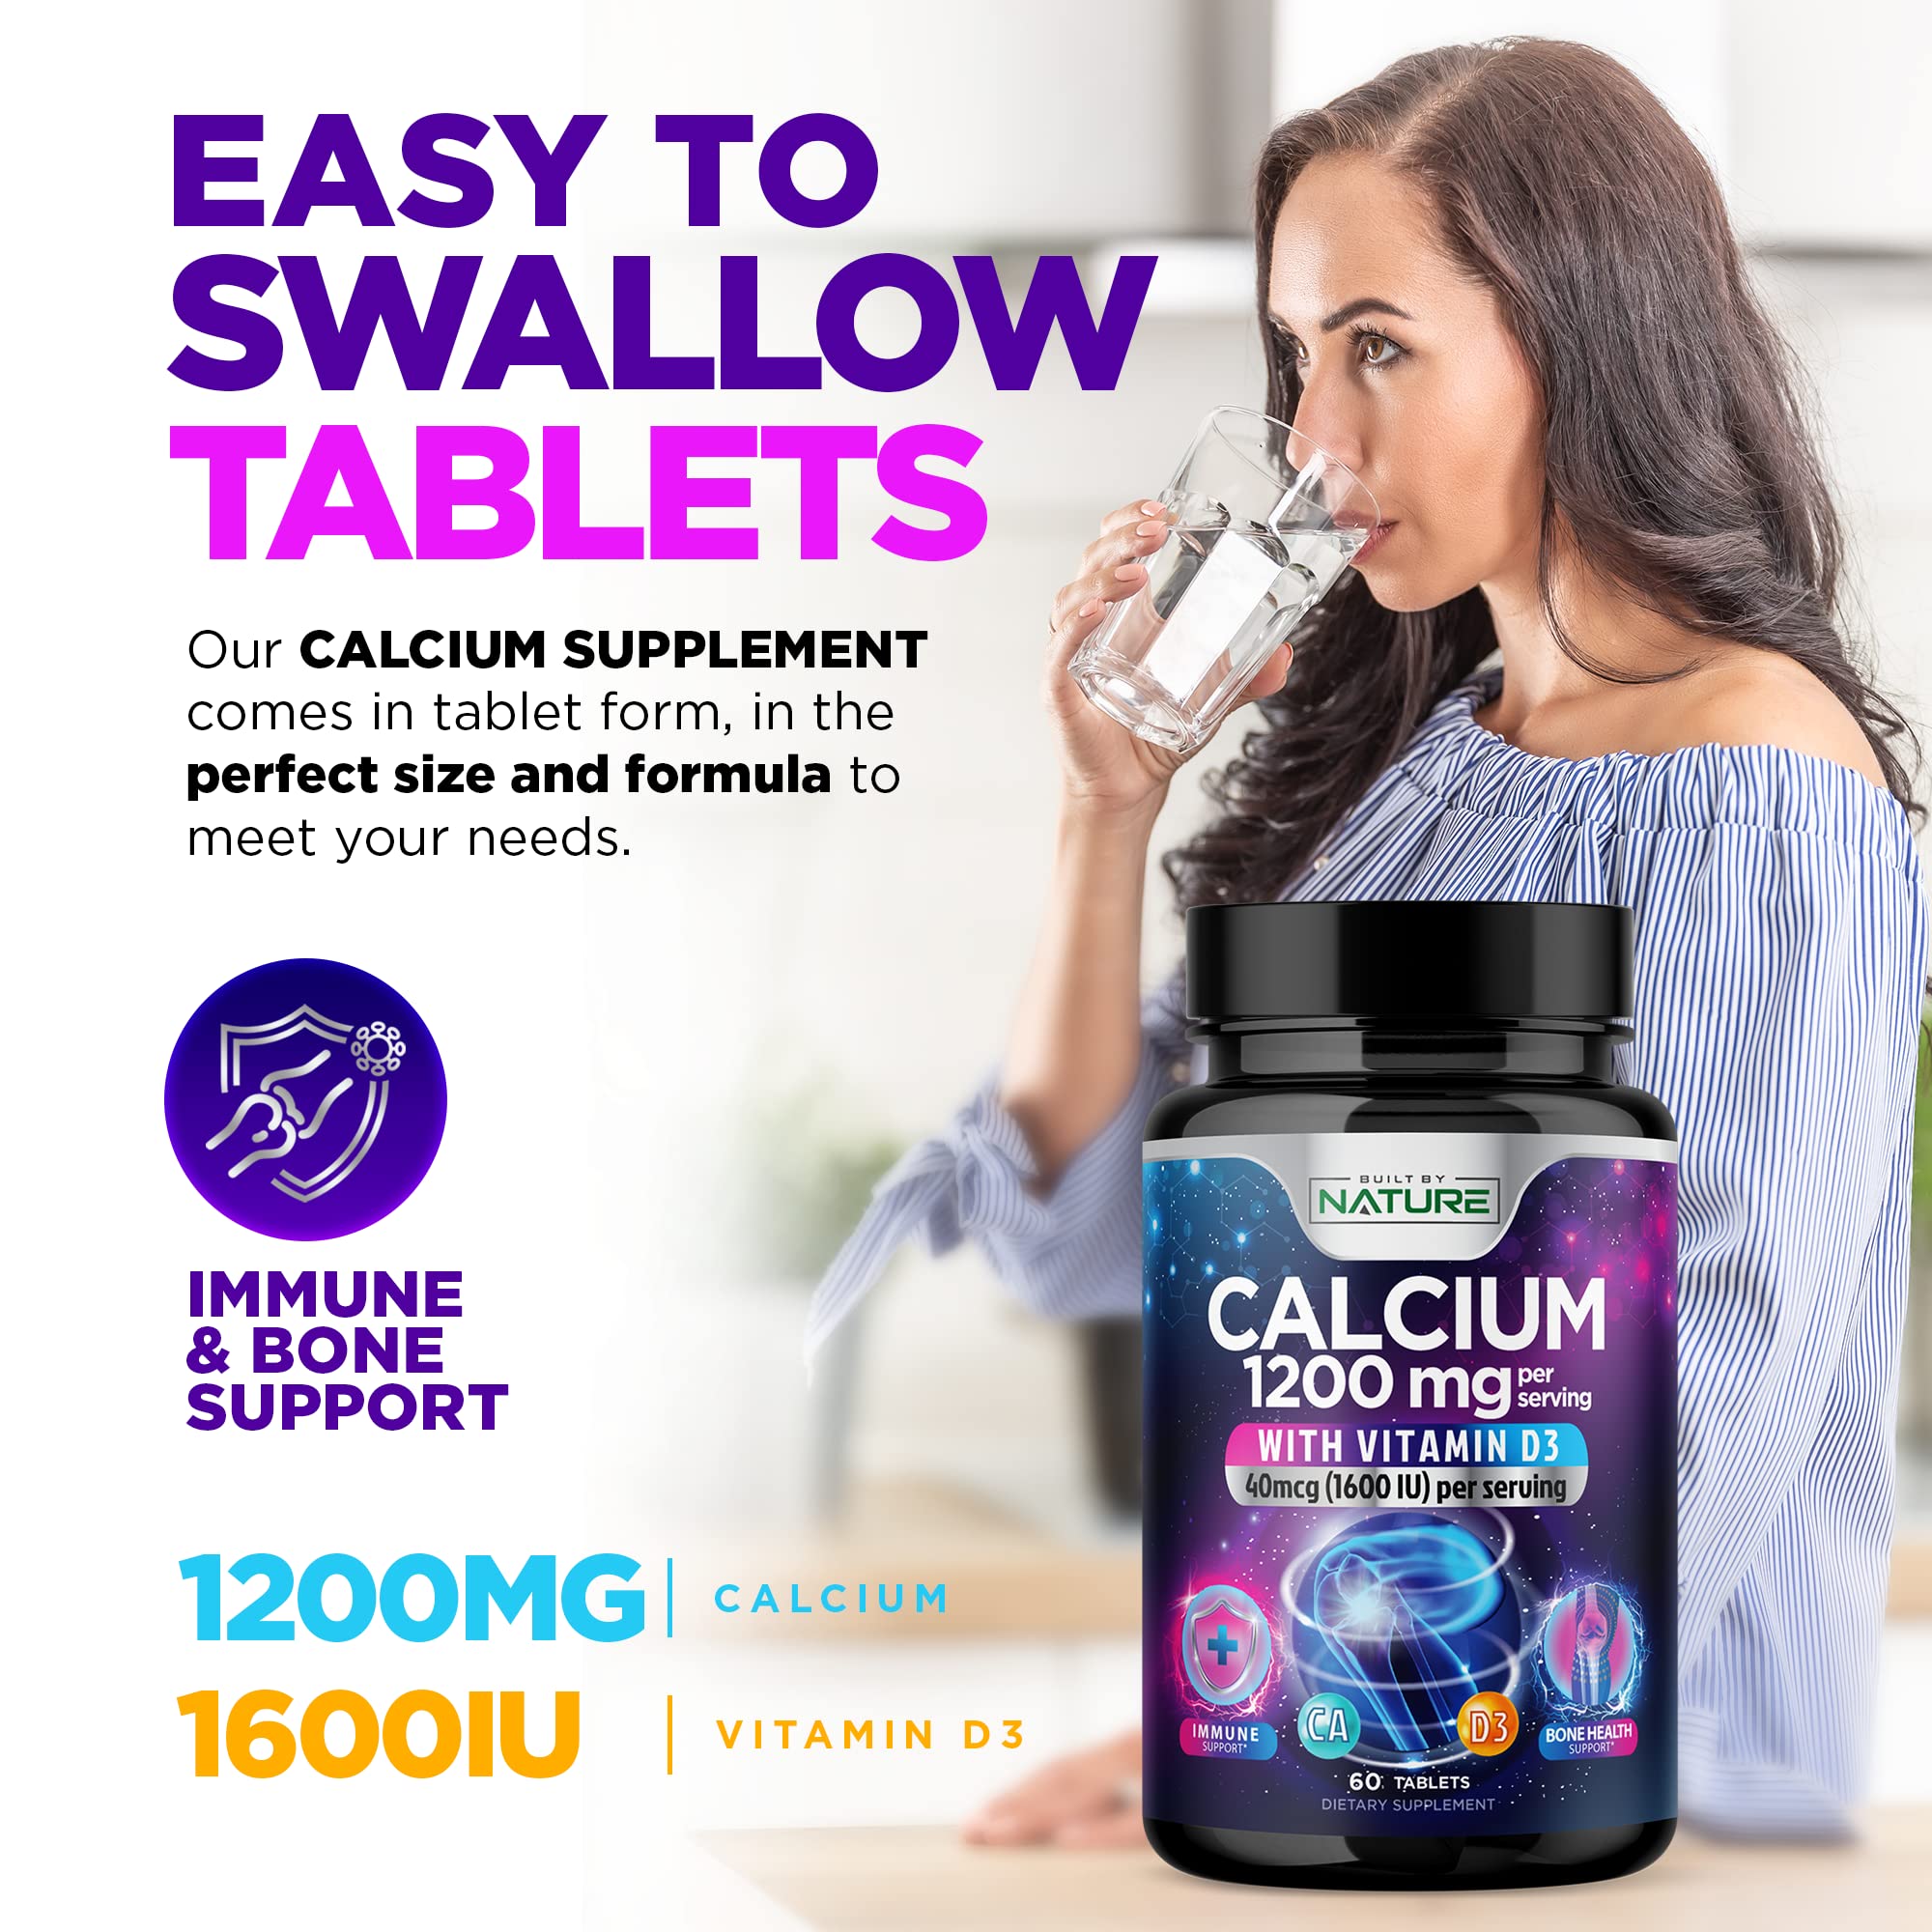 Calcium 1200mg with Vitamin D3 for Best Absorption - Advanced Bone Support Supplement, 1200 mg Calcium Carbonate & 1600 IU Vitamin D, Slow Release for Immune Support, Easy to Swallow, 120 Tablets